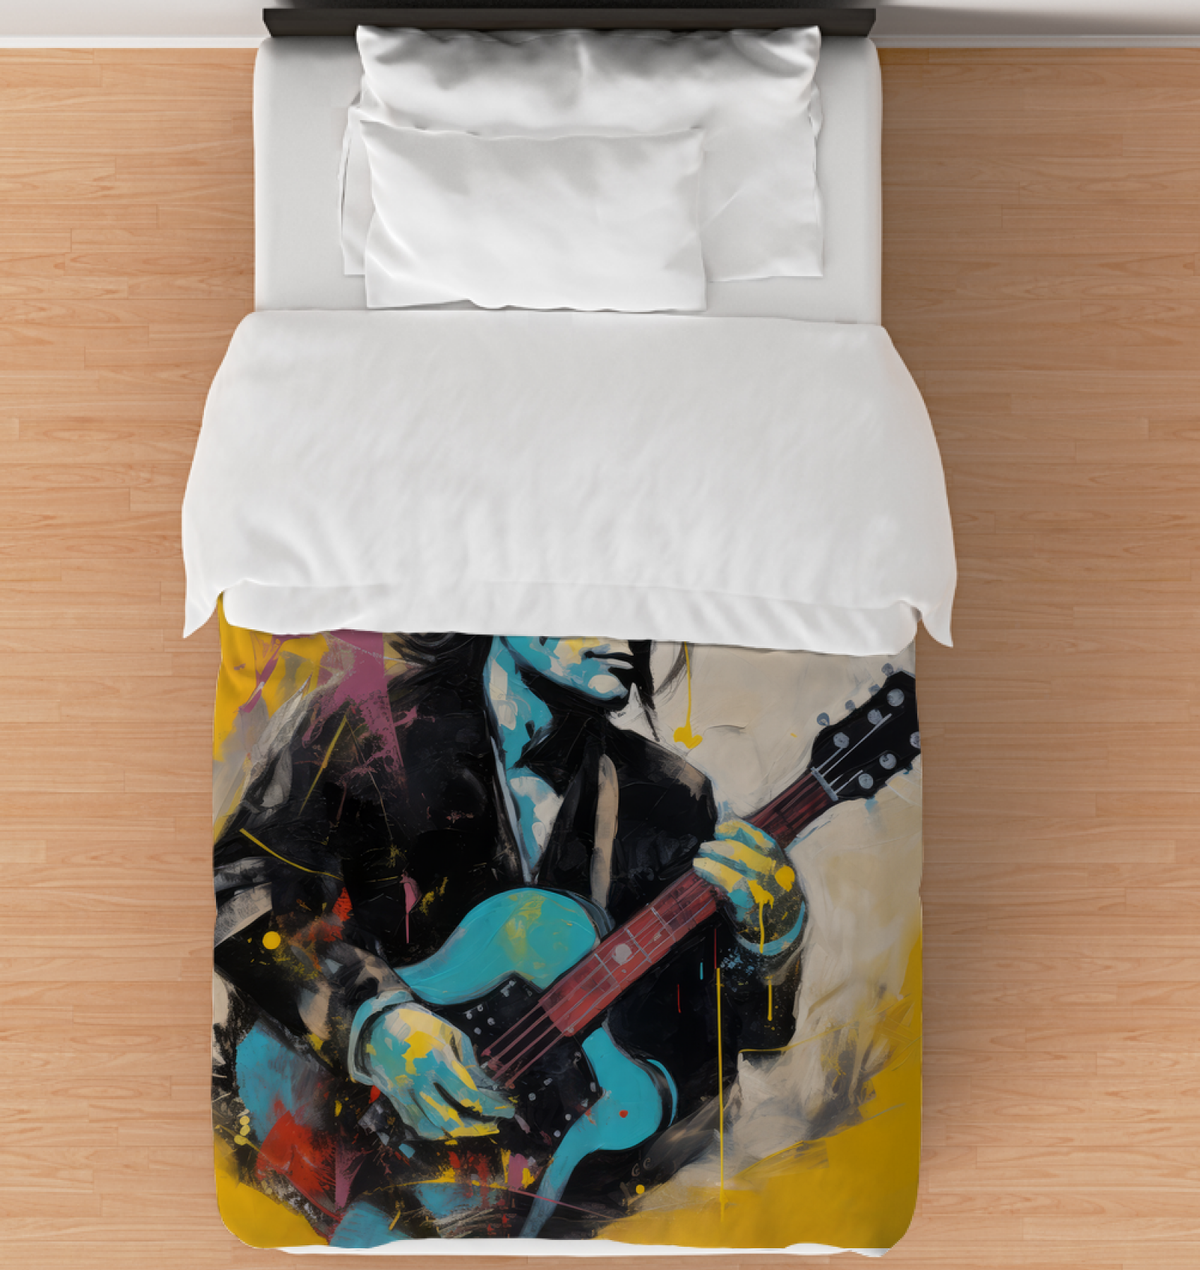 Linear Abstraction Duvet Cover - Bedroom Decor.